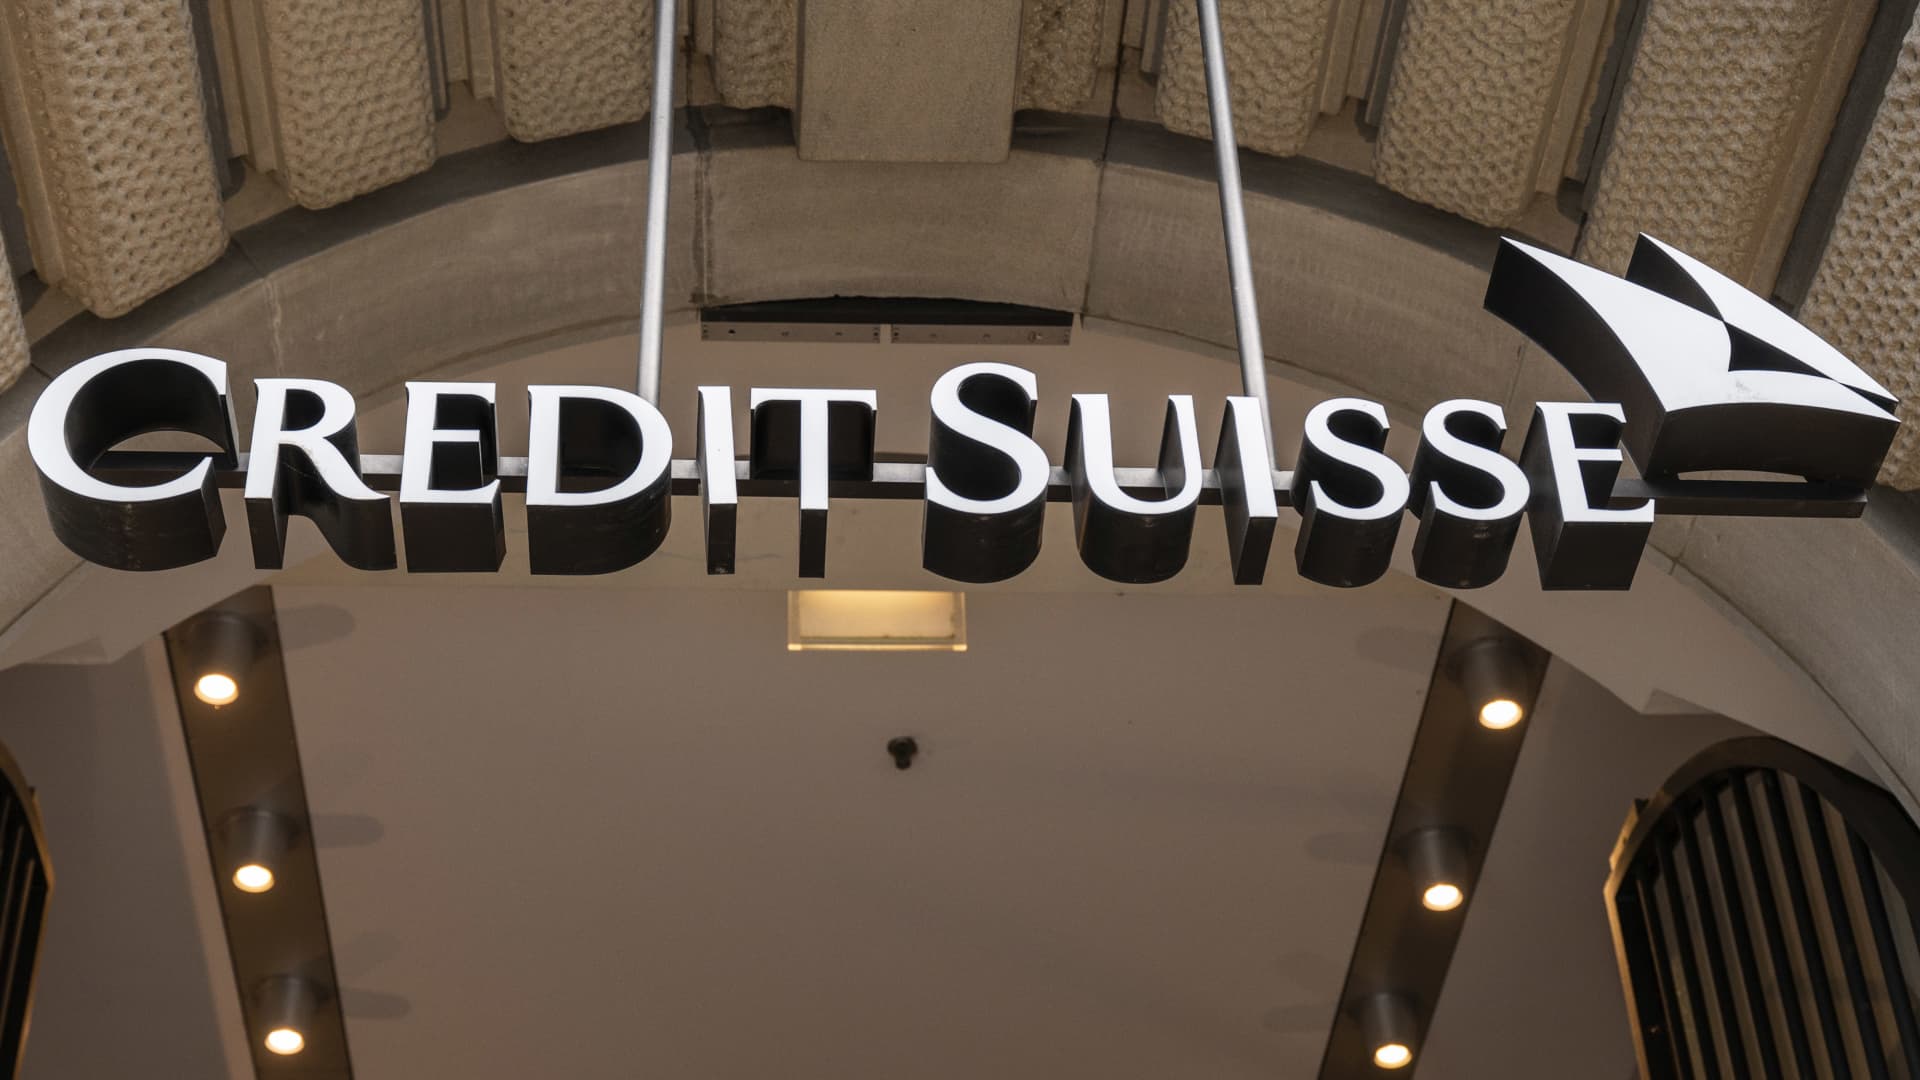 Credit Suisse is not about to cause a Lehman moment, economist Sri-Kumar says - CNBC